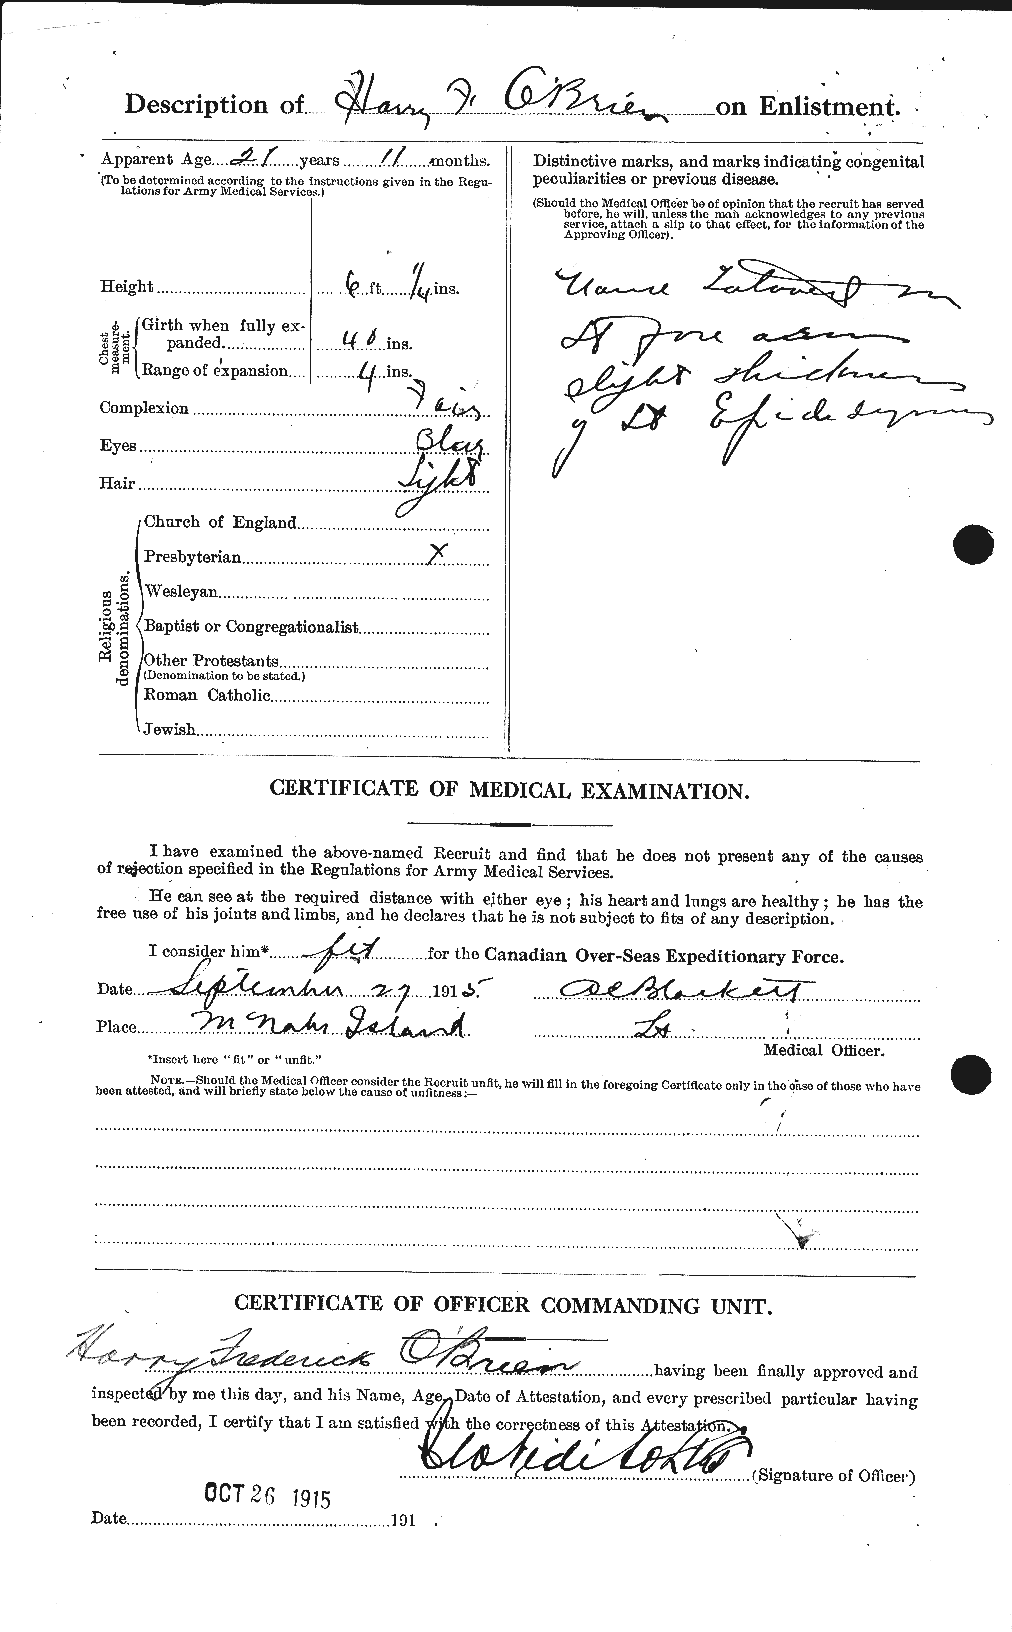 Personnel Records of the First World War - CEF 554048b